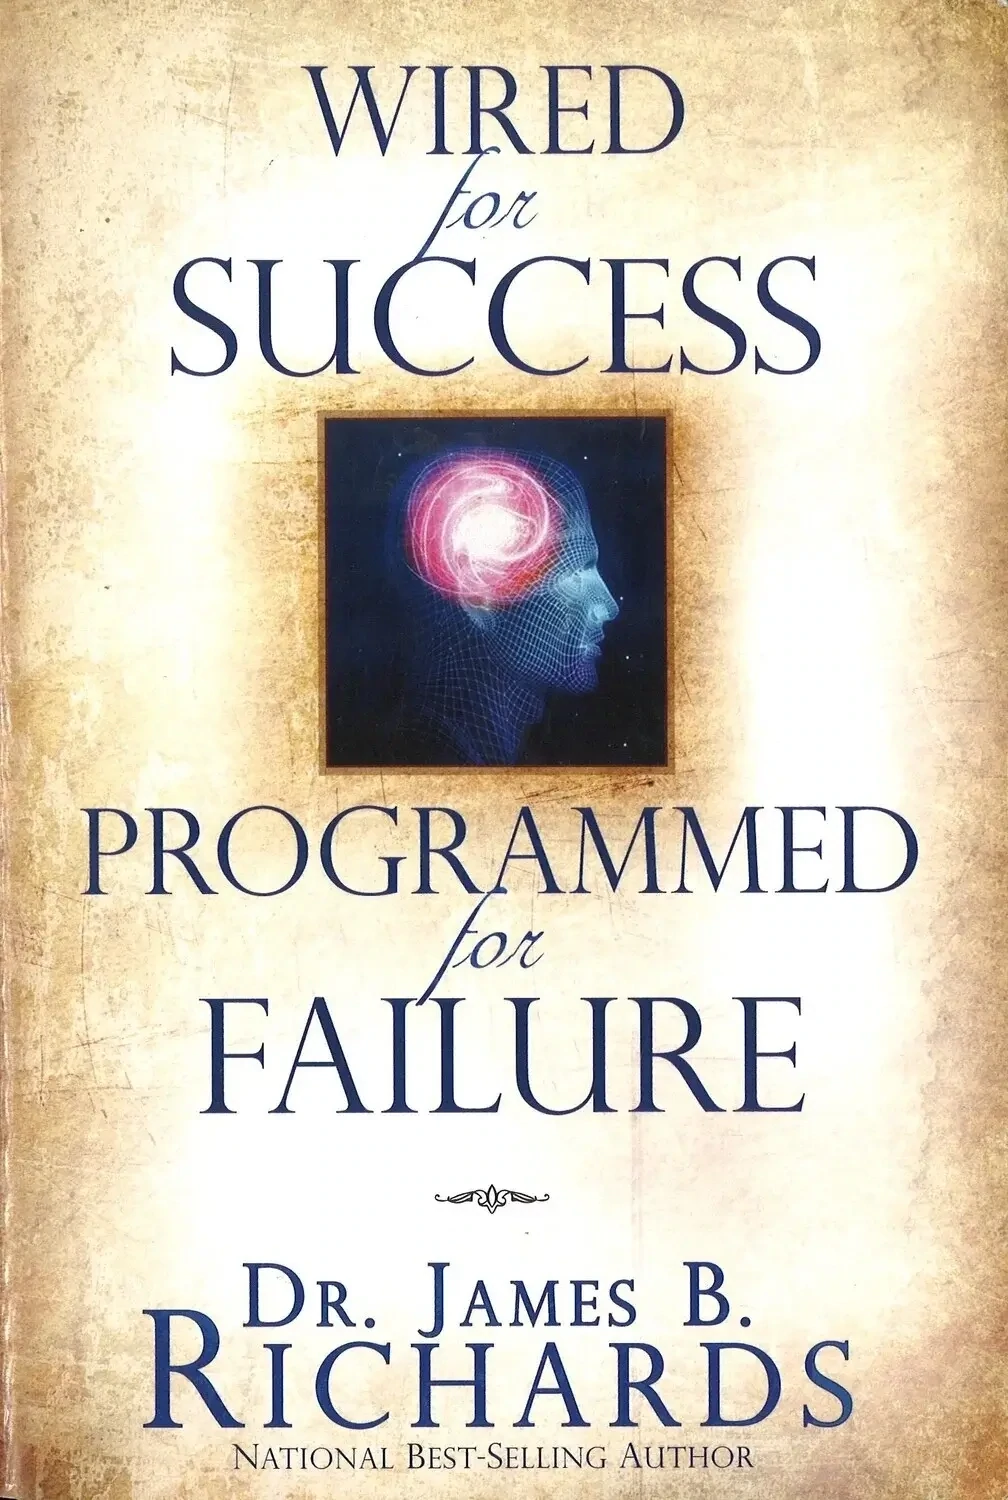 Wired for Success Programmed for Failure, Dr. James B. Richards